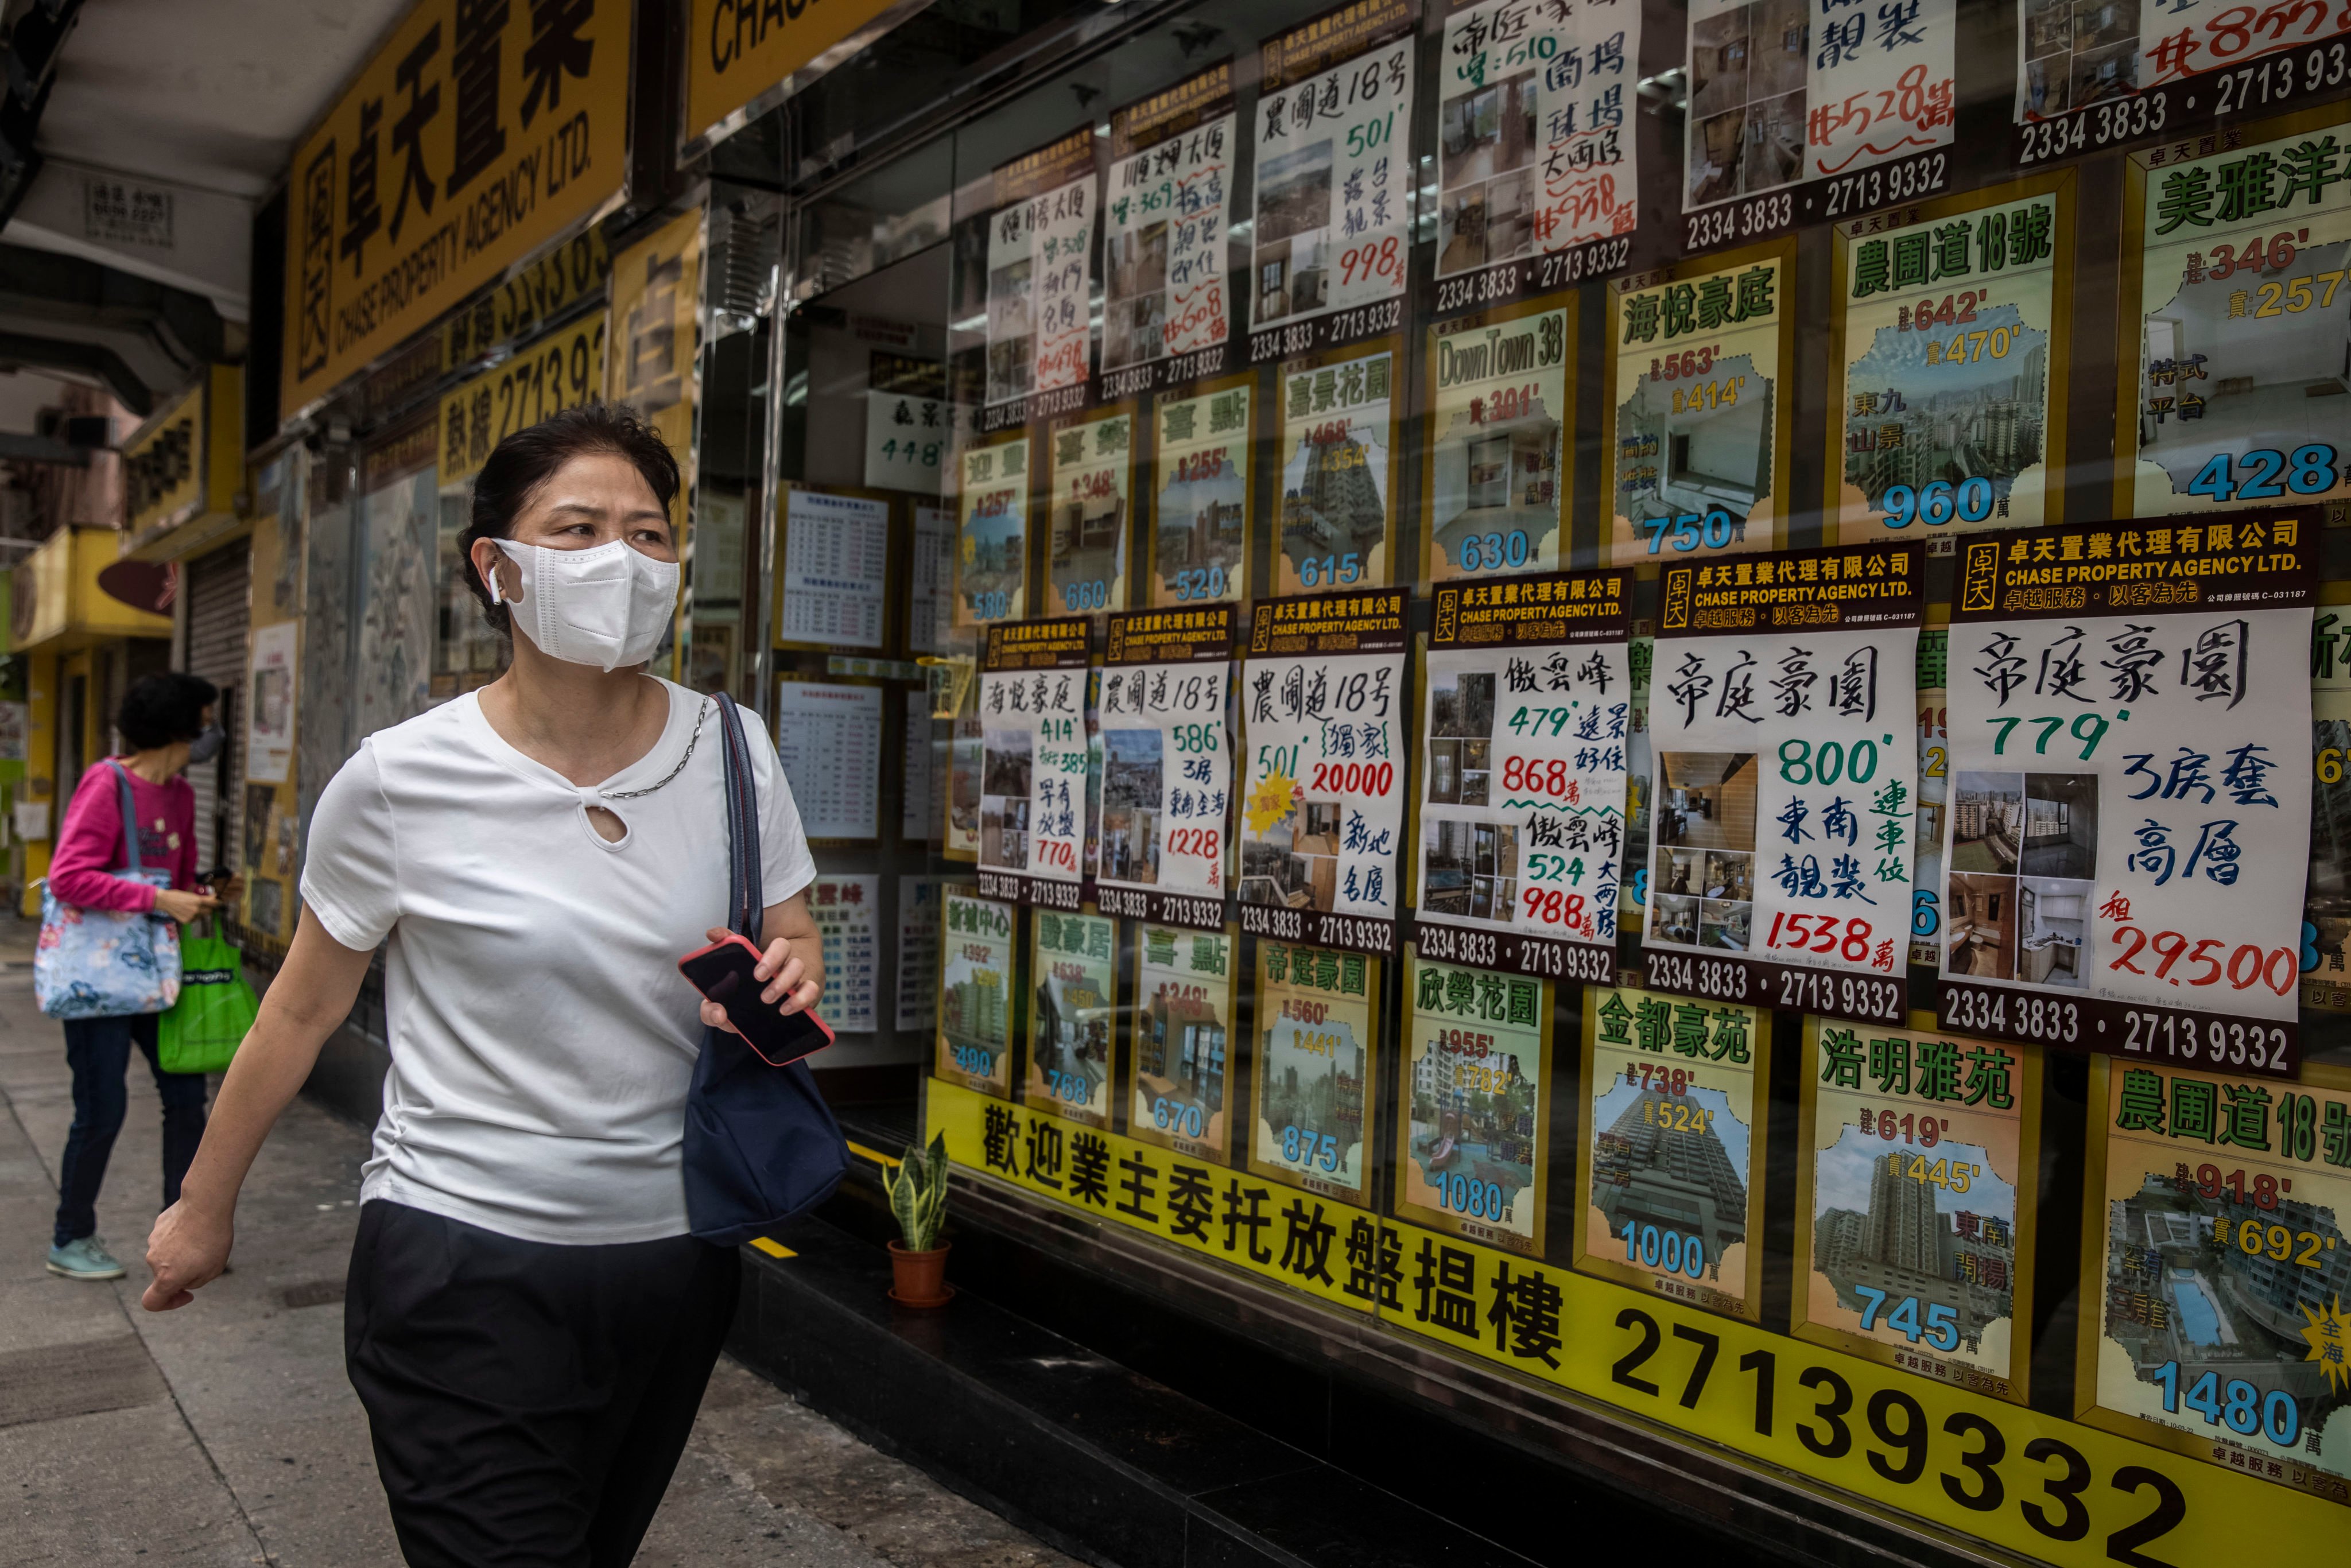 A woman walks past a property agent in Hong Kong on May 13, 2022. Recent US rate increases have come at a bad time for Hong Kong which, thanks to its dollar peg, must follow suit despite its own flagging economy. Photo: AFP